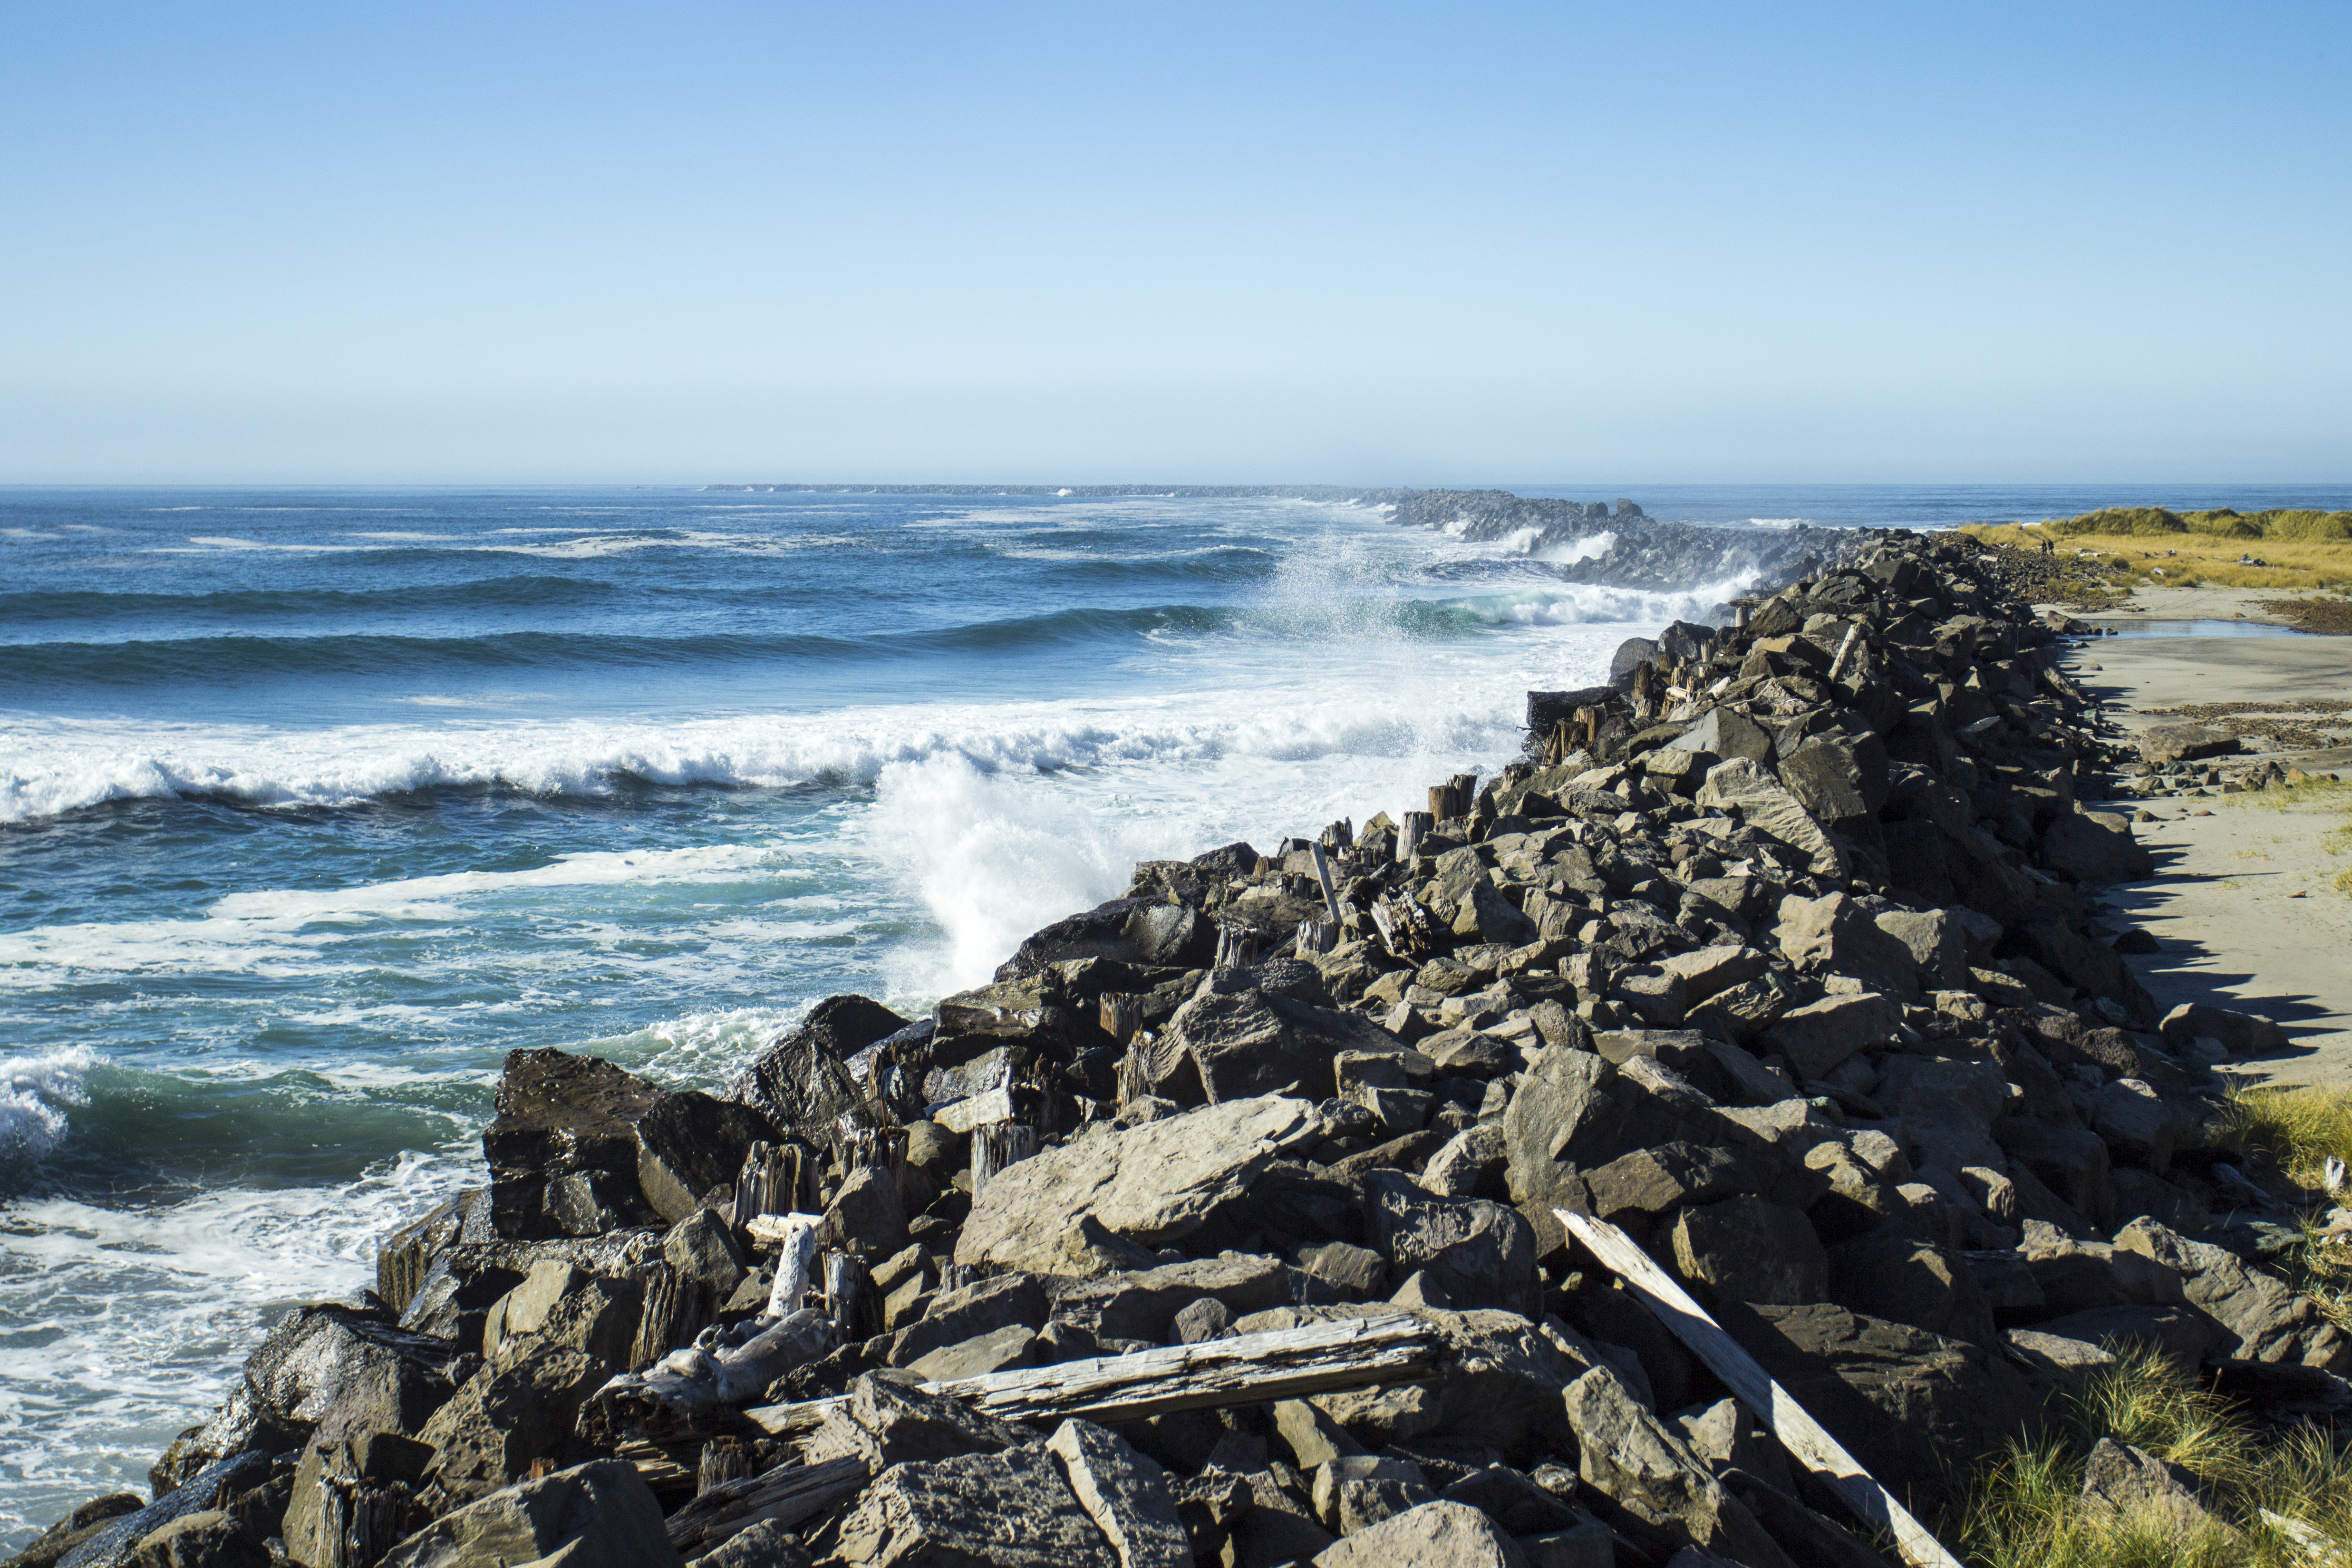 South Jetty, mouth of the Columbia River, Oregon, Bay, Coast, Columbia River, Jetty, HQ Photo